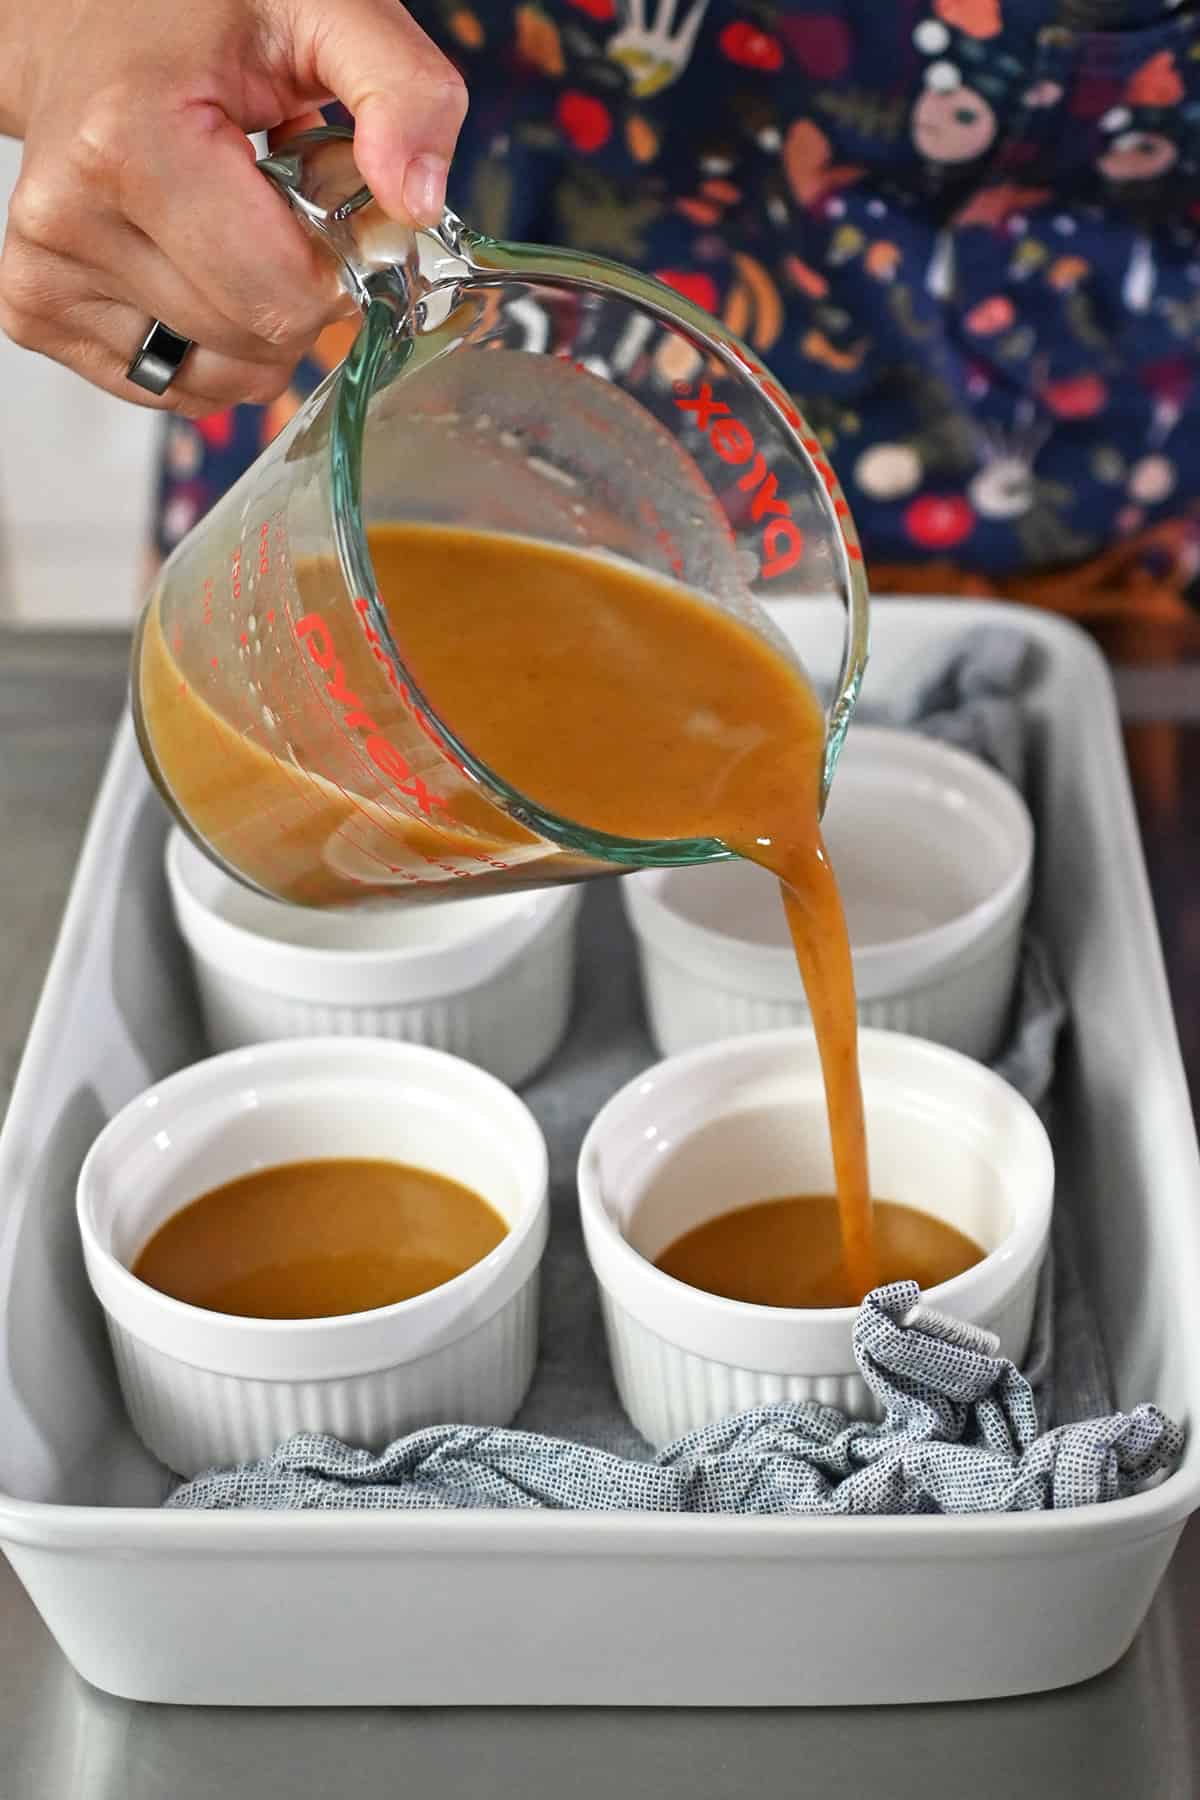 Pouring the pumpkin custard mixture into white ramekins in a casserole dish lined with a blue and white towel.